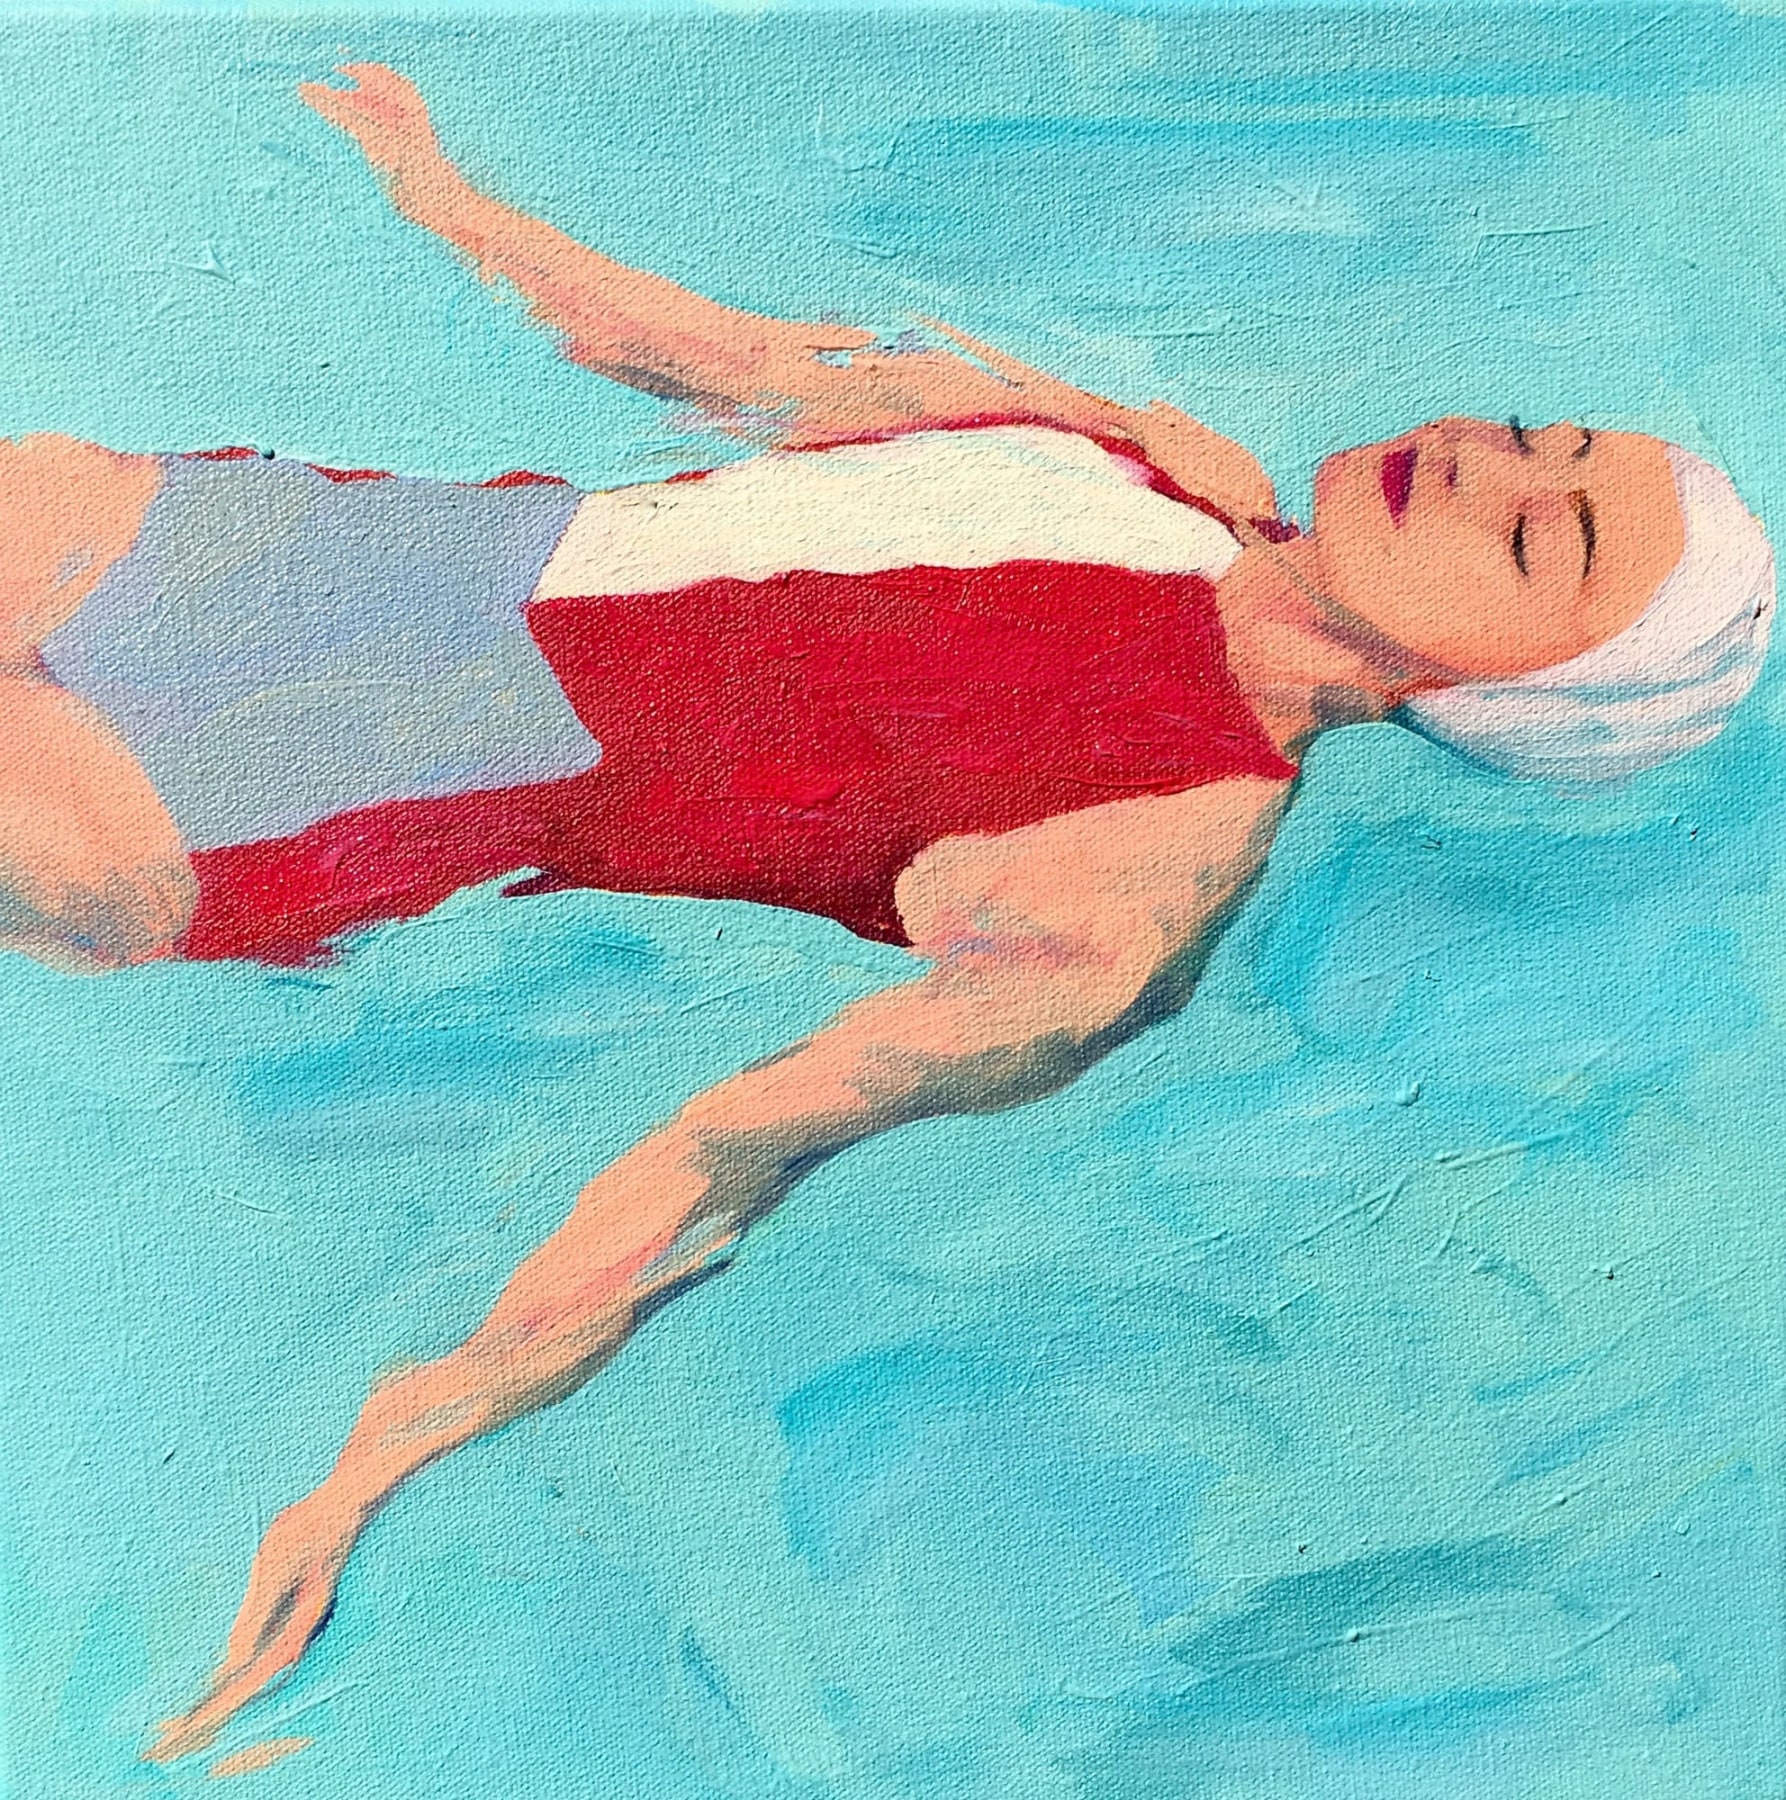 TRACEY SYLVESTER HARRIS , Floating Swimmer, 2018